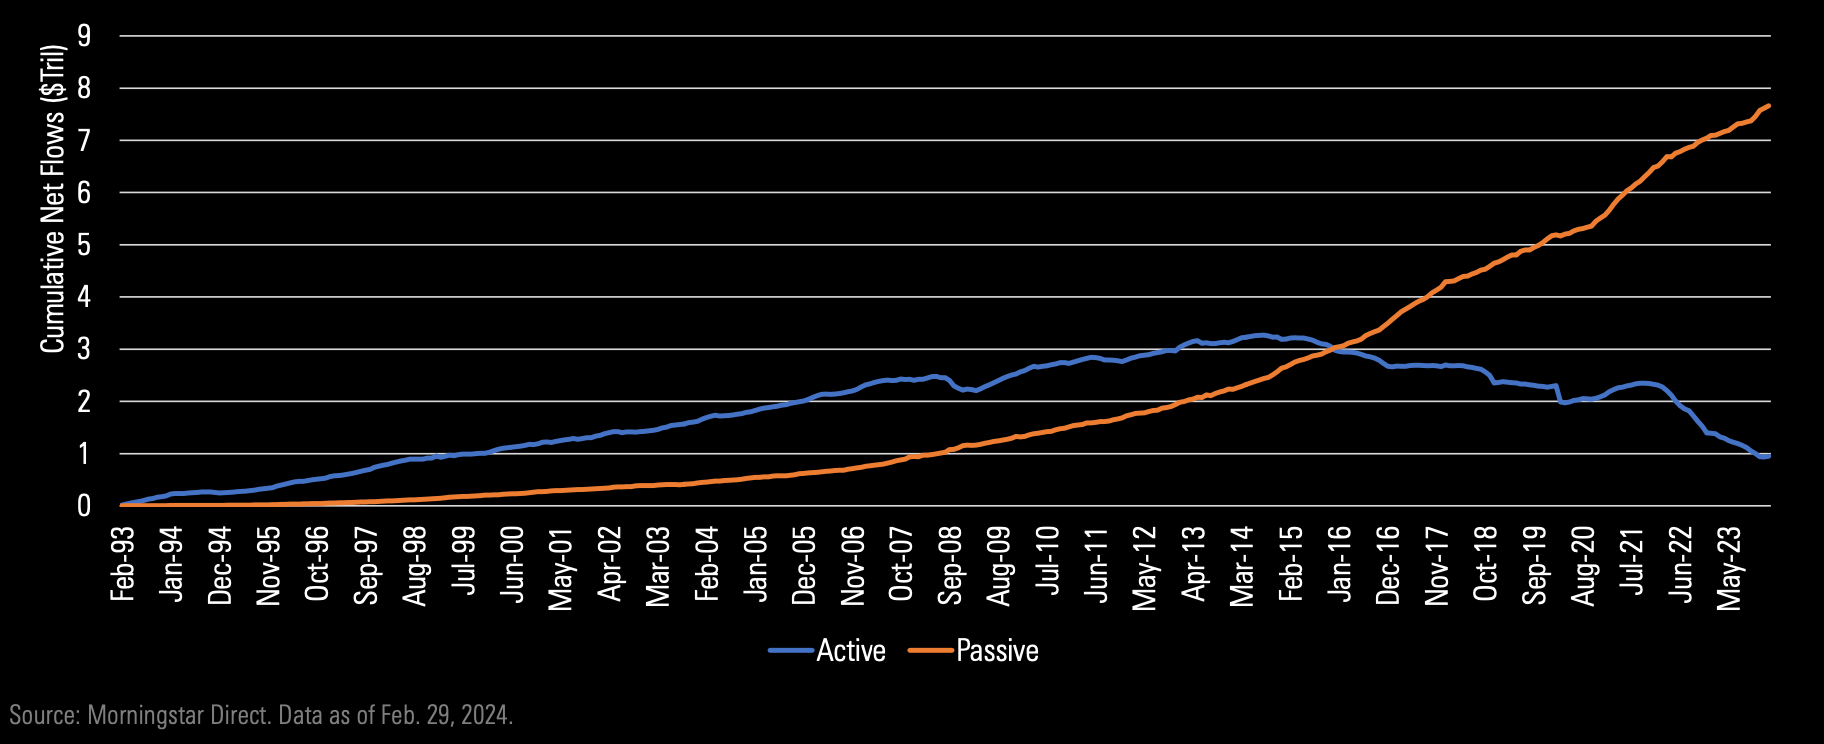 Line graph showing cumulative net flows of active and passive investing from February 1993 to May 2023.